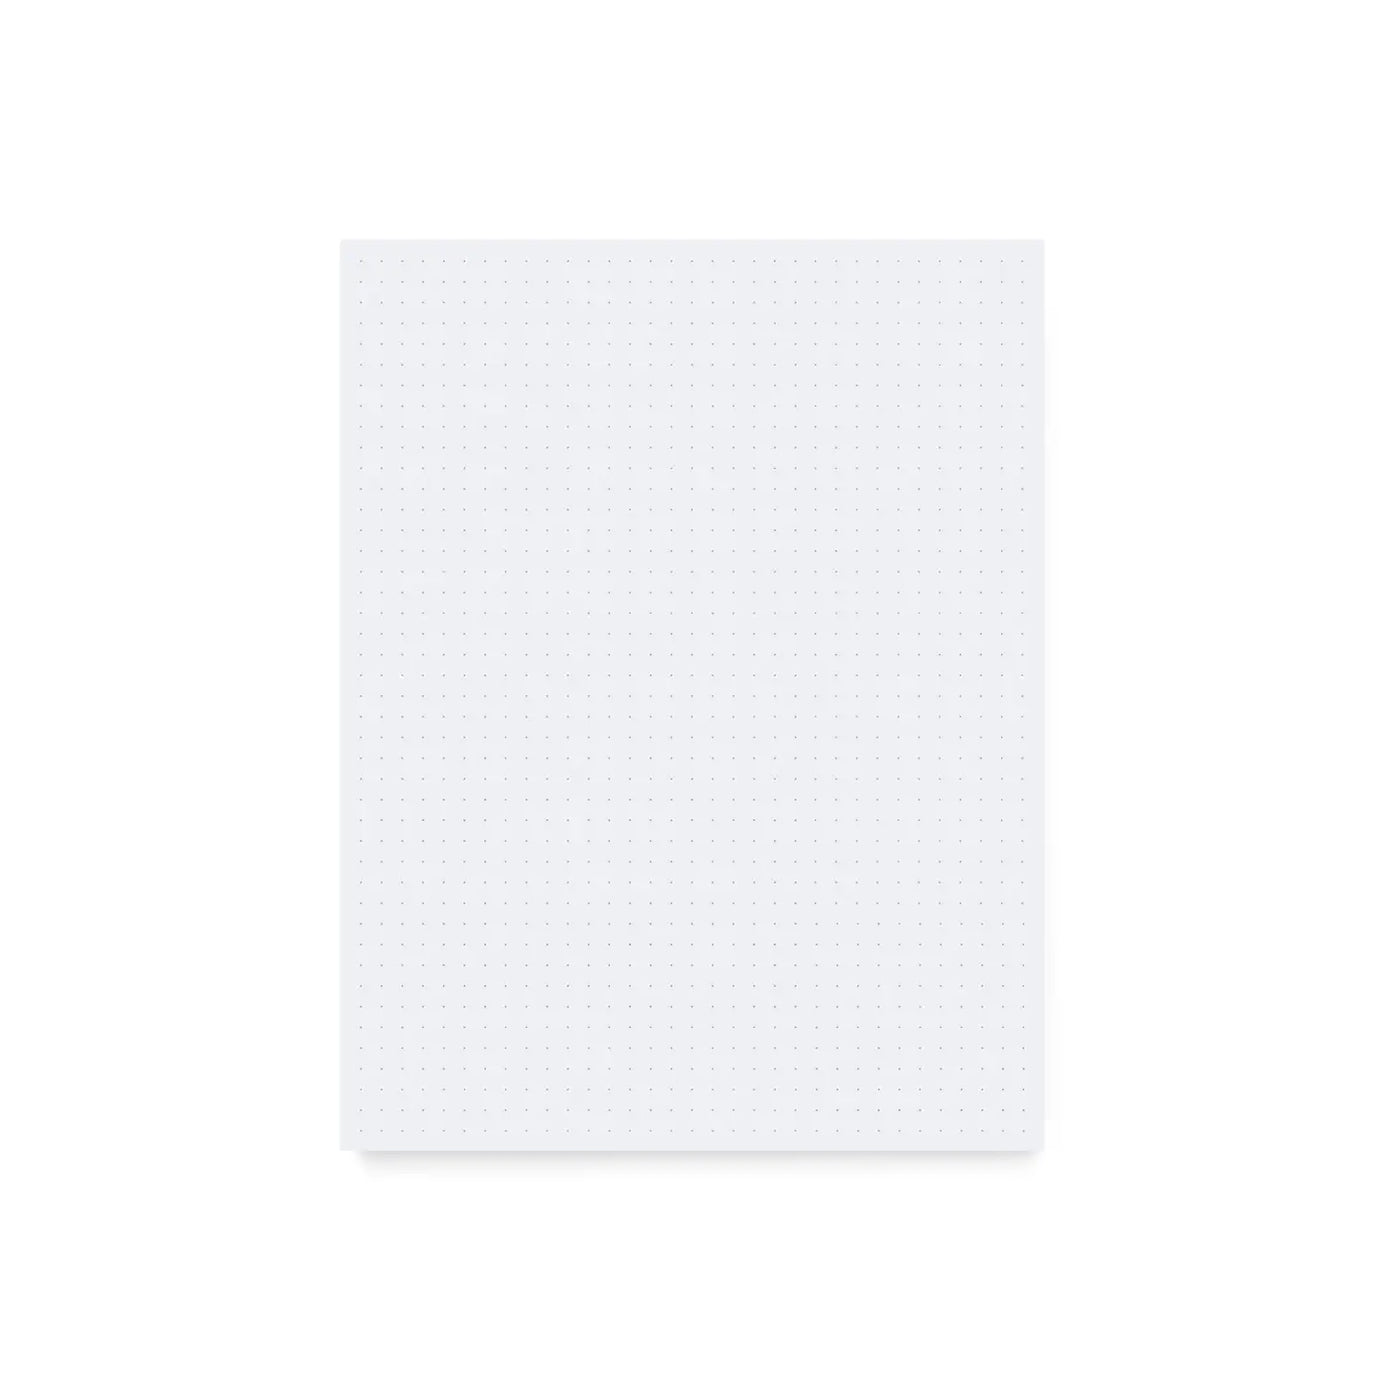 Appointed Dot Grid Pad